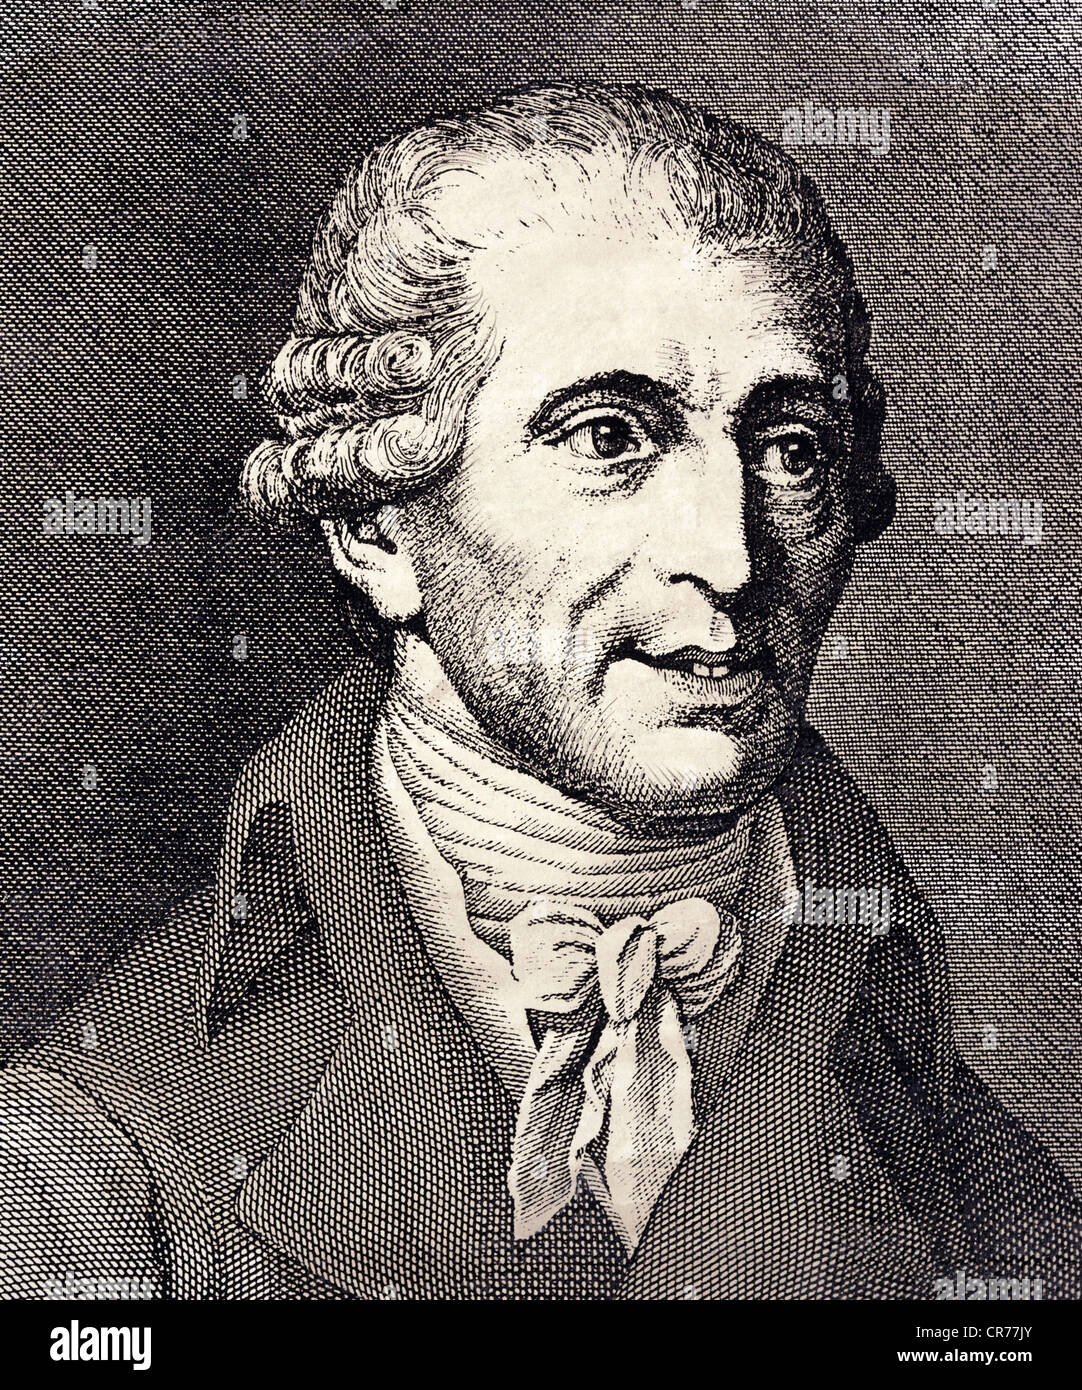 Haydn, Joseph, 31.3.1732 - 31.5.1809, Austrian composer, portrait, copper engraving, late 18th century, Artist's Copyright has not to be cleared Stock Photo